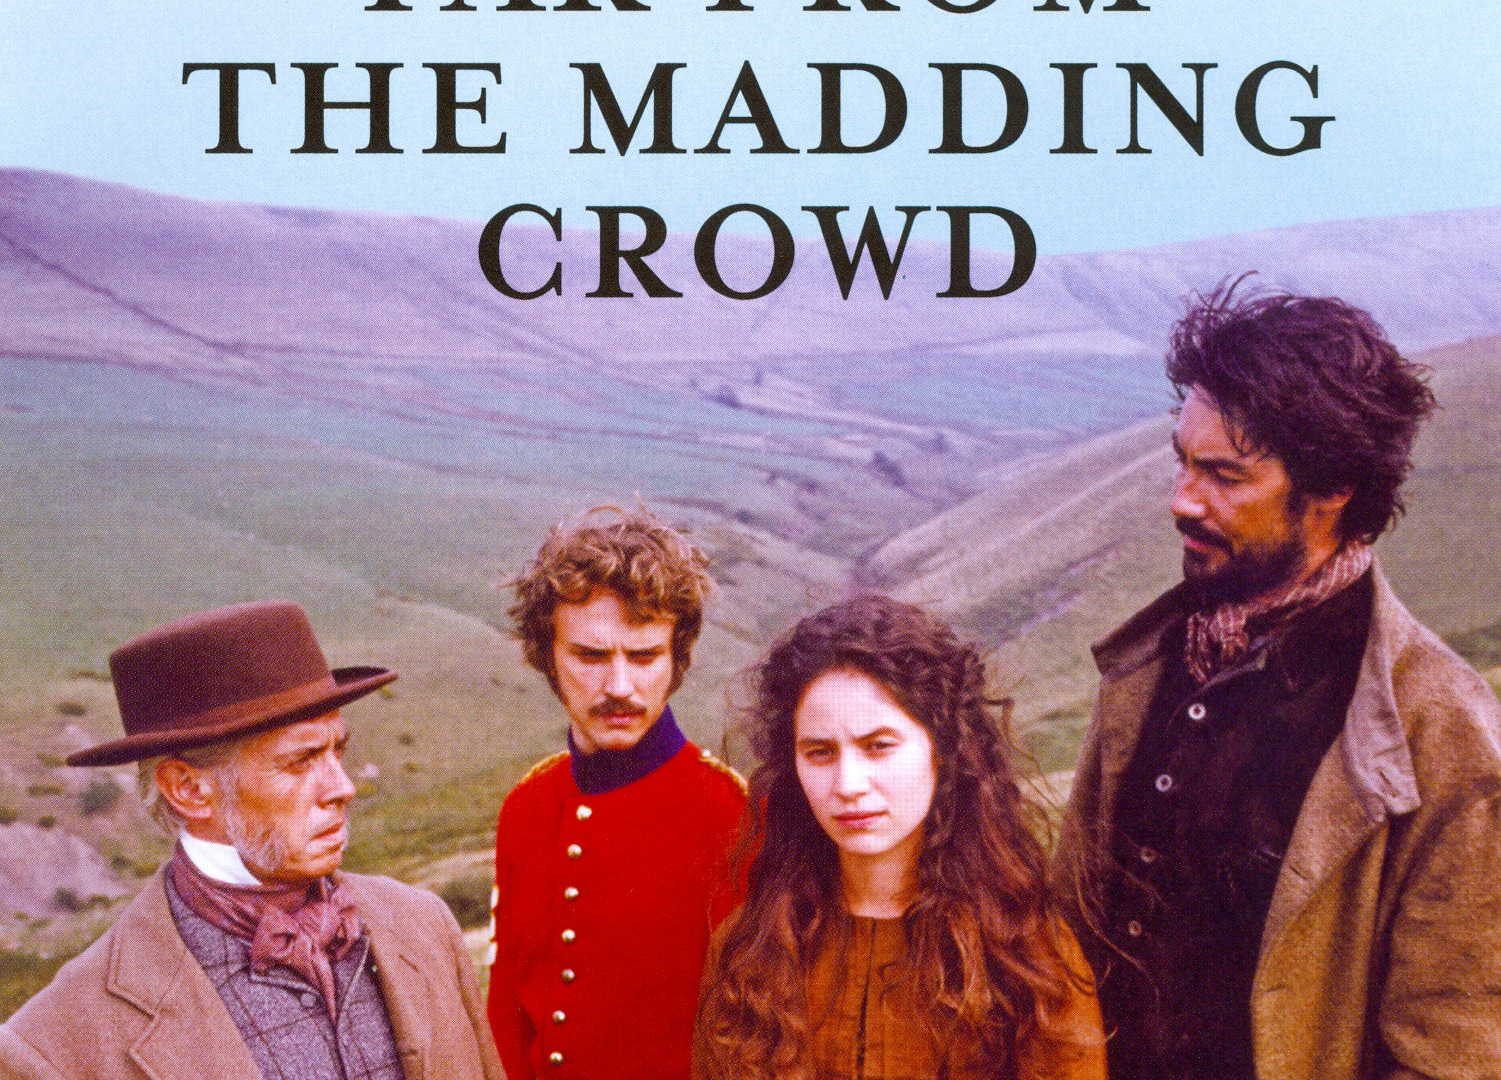 Show Far from the Madding Crowd